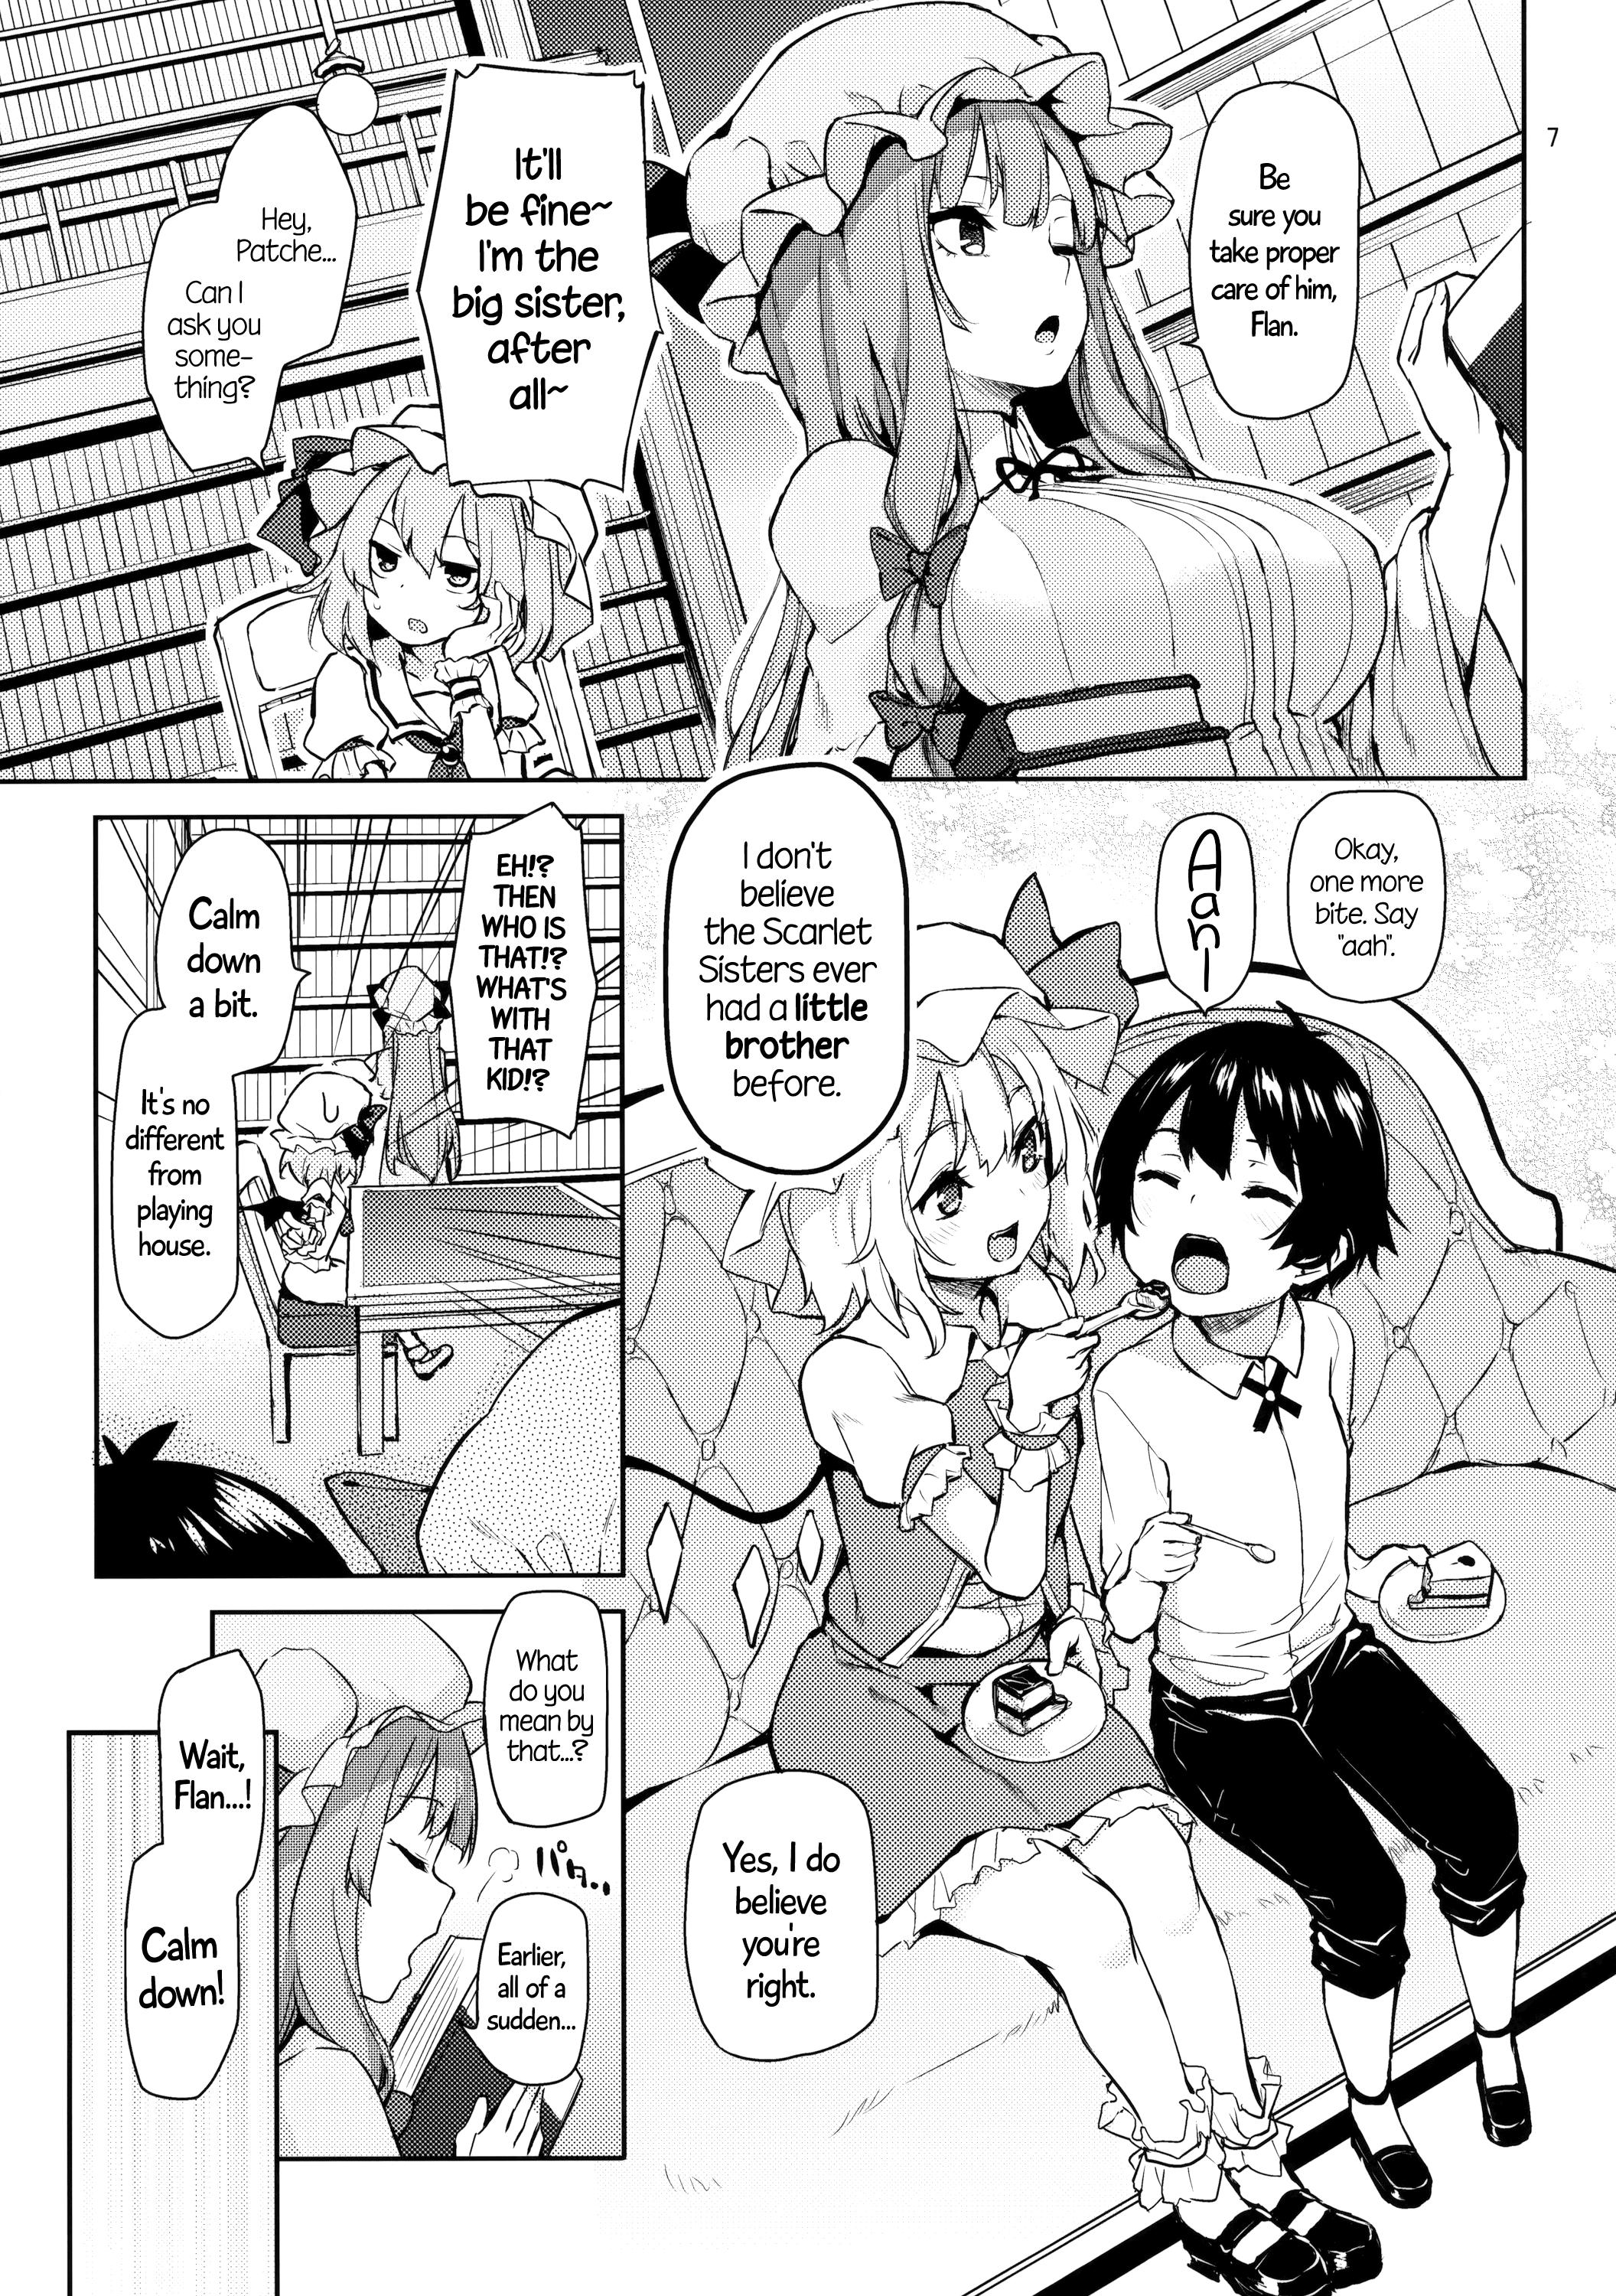 Pounded (Reitaisai 13) [Anmitsuyomogitei (Michiking)] Osewa Shinaide Flan Onee-chan! | Don't Take Care Of Me, Flan Onee-chan! (Touhou Project) [English] =Facedesk + CW= - Touhou project Stepsister - Page 7